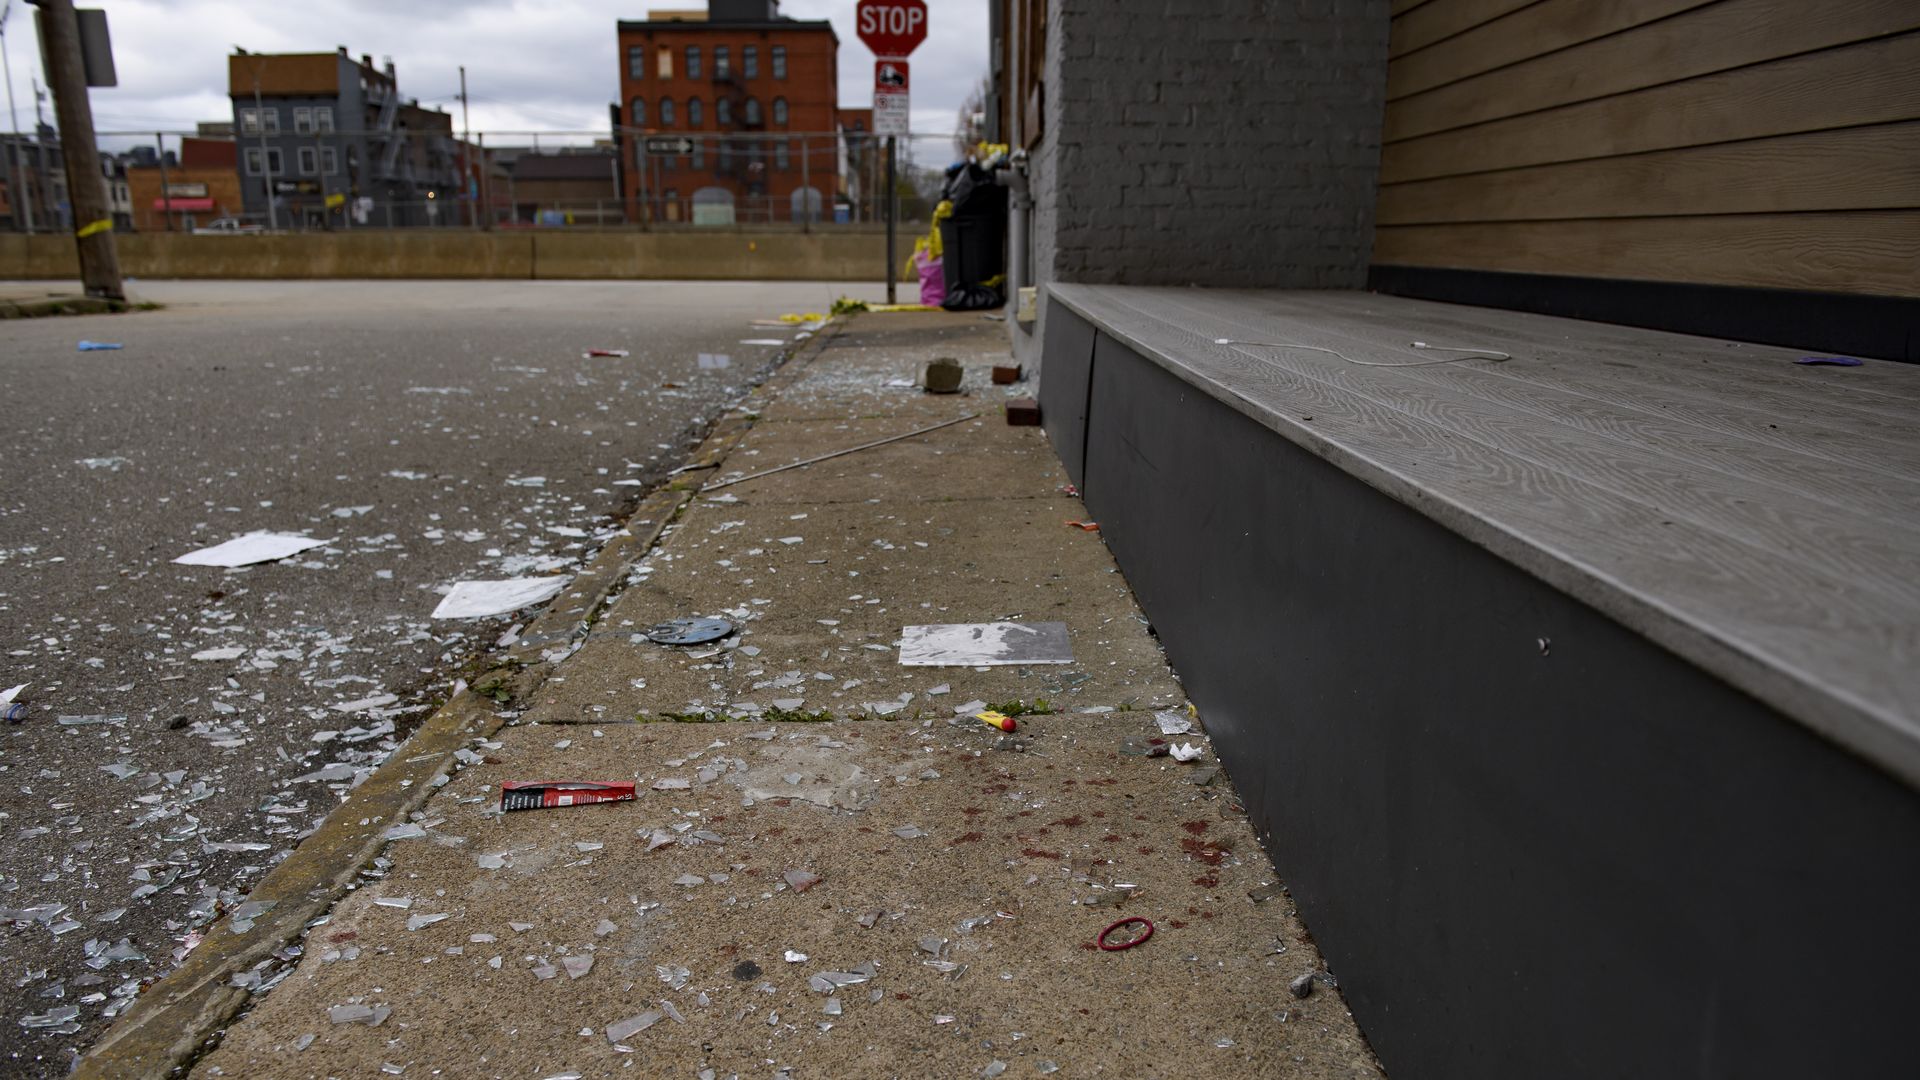 Broken glass and bloodstains are seen outside an Airbnb apartment rental along Suismon Street on April 17, 2022 in Pittsburgh, Pennsylvania.